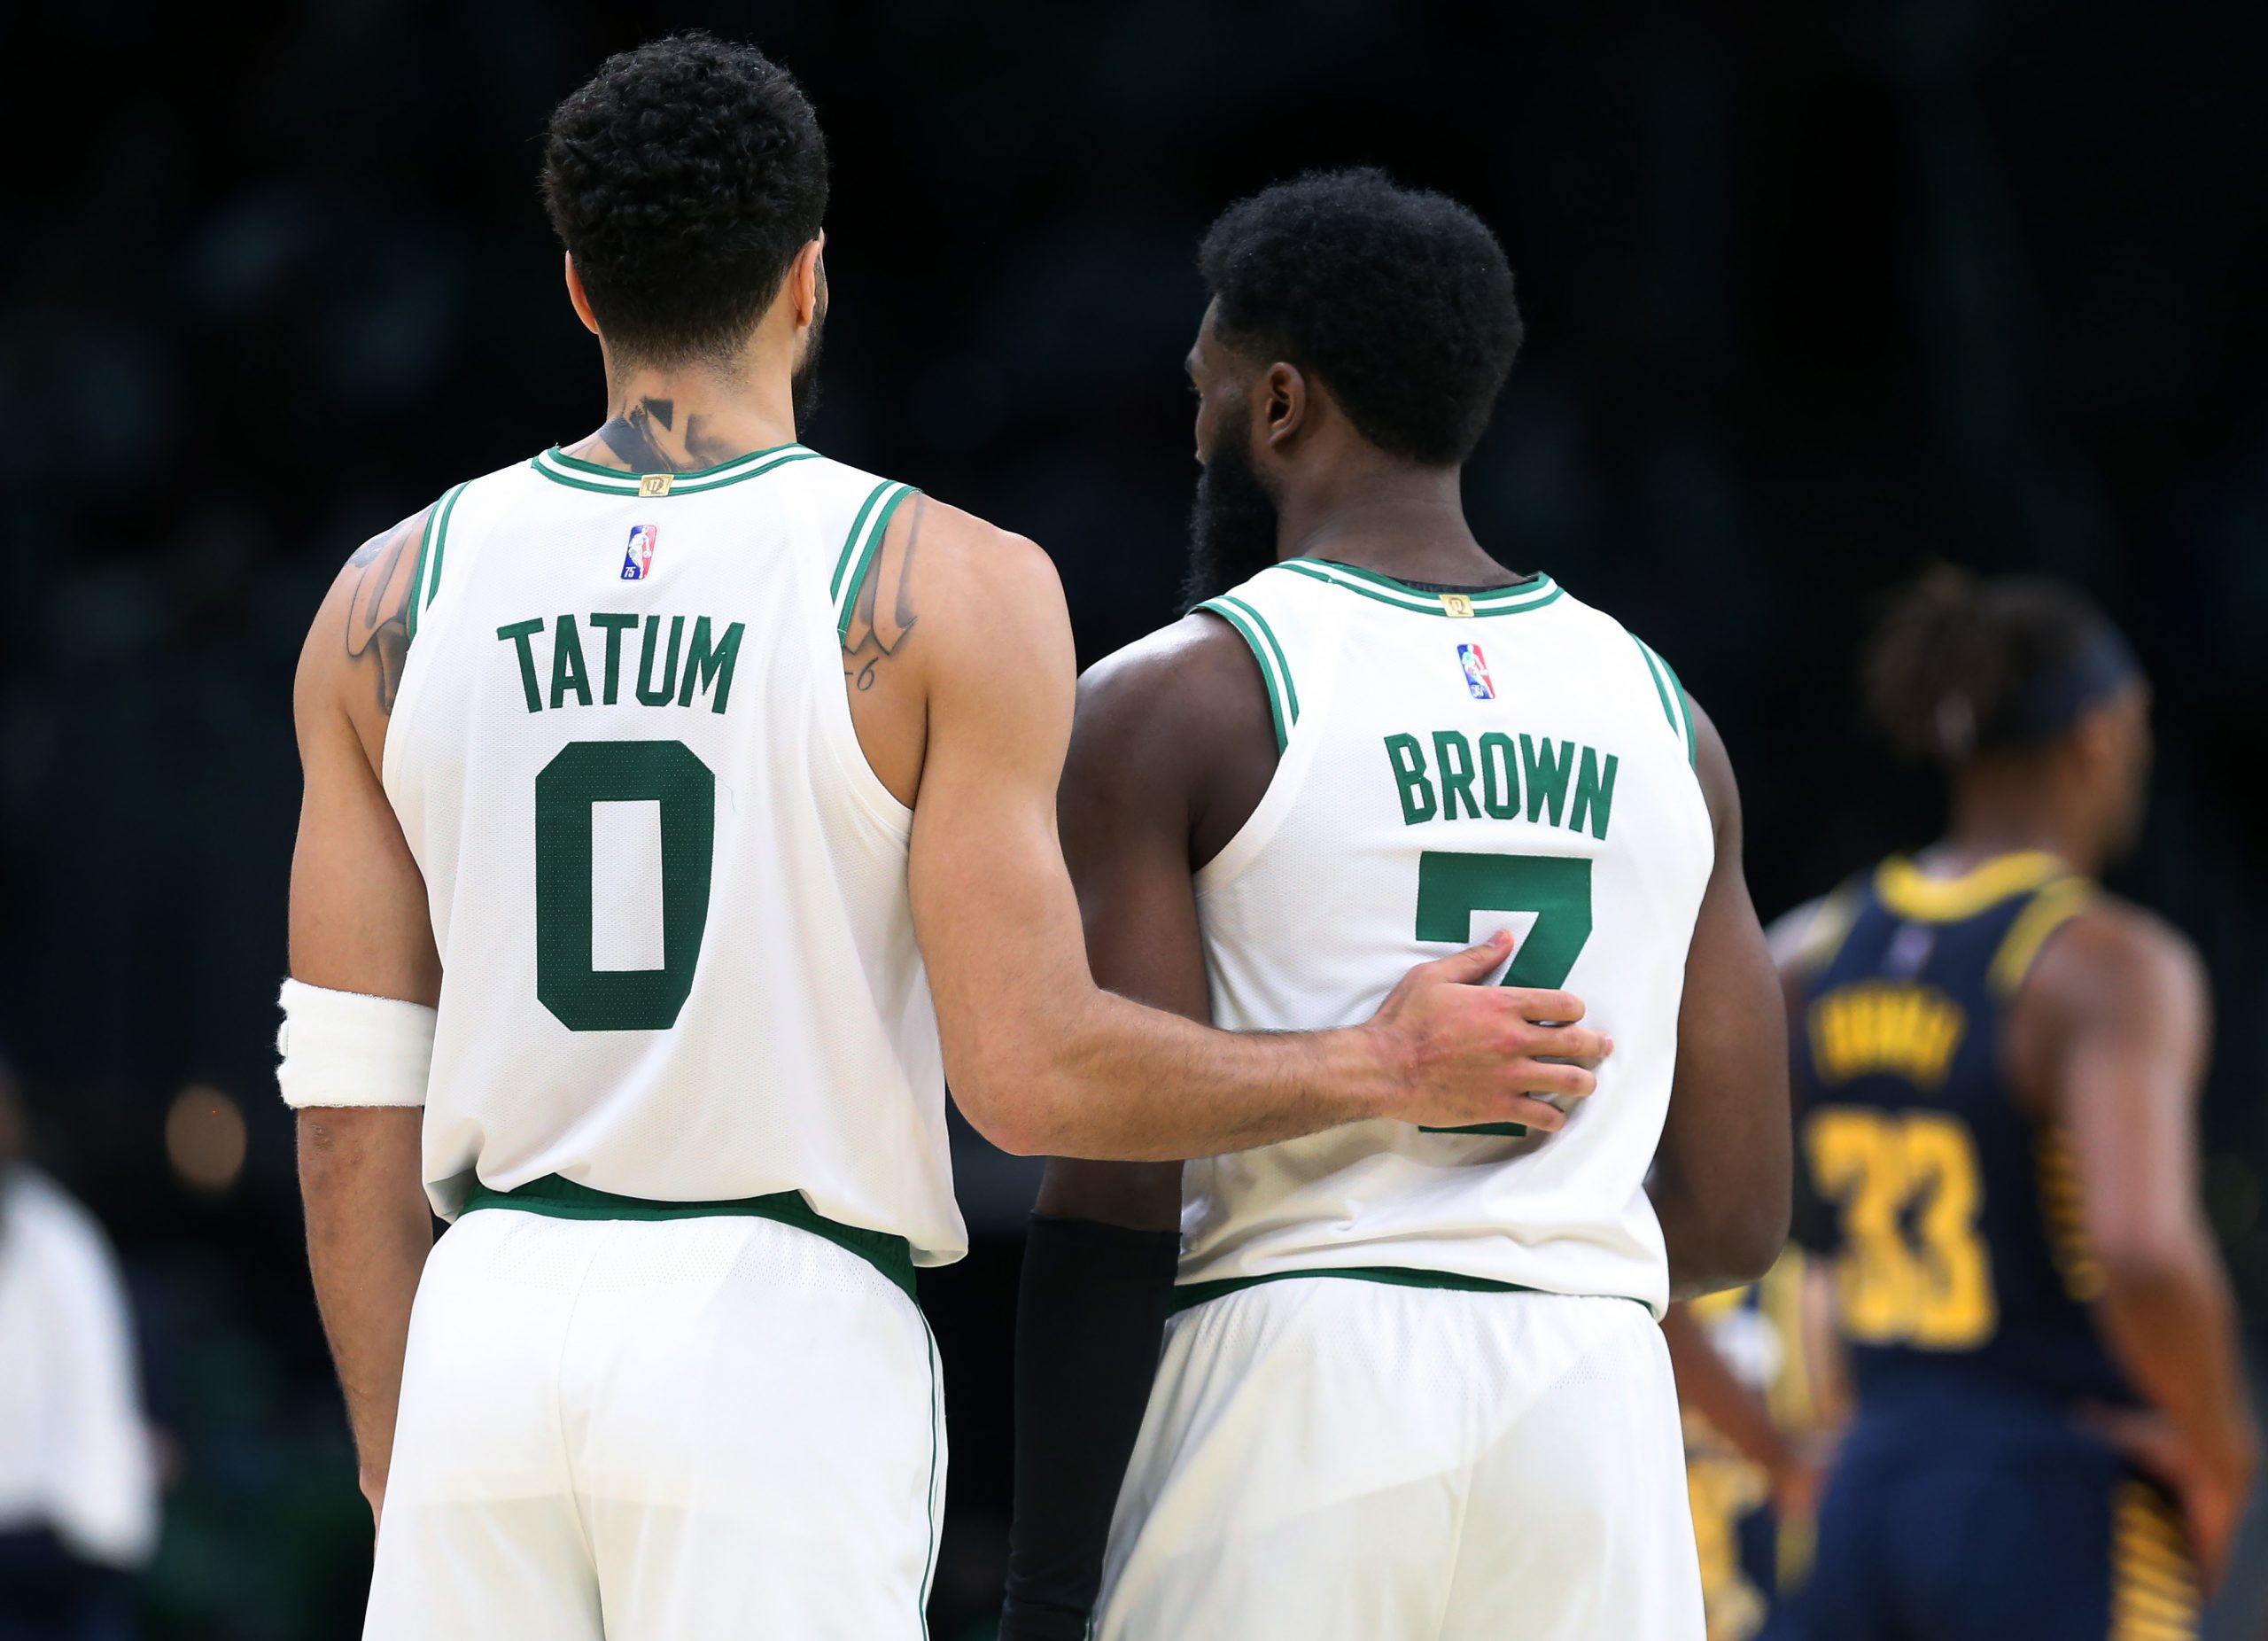 The Celtics Jayson Tatum and Jaylen Brown are pictured together.